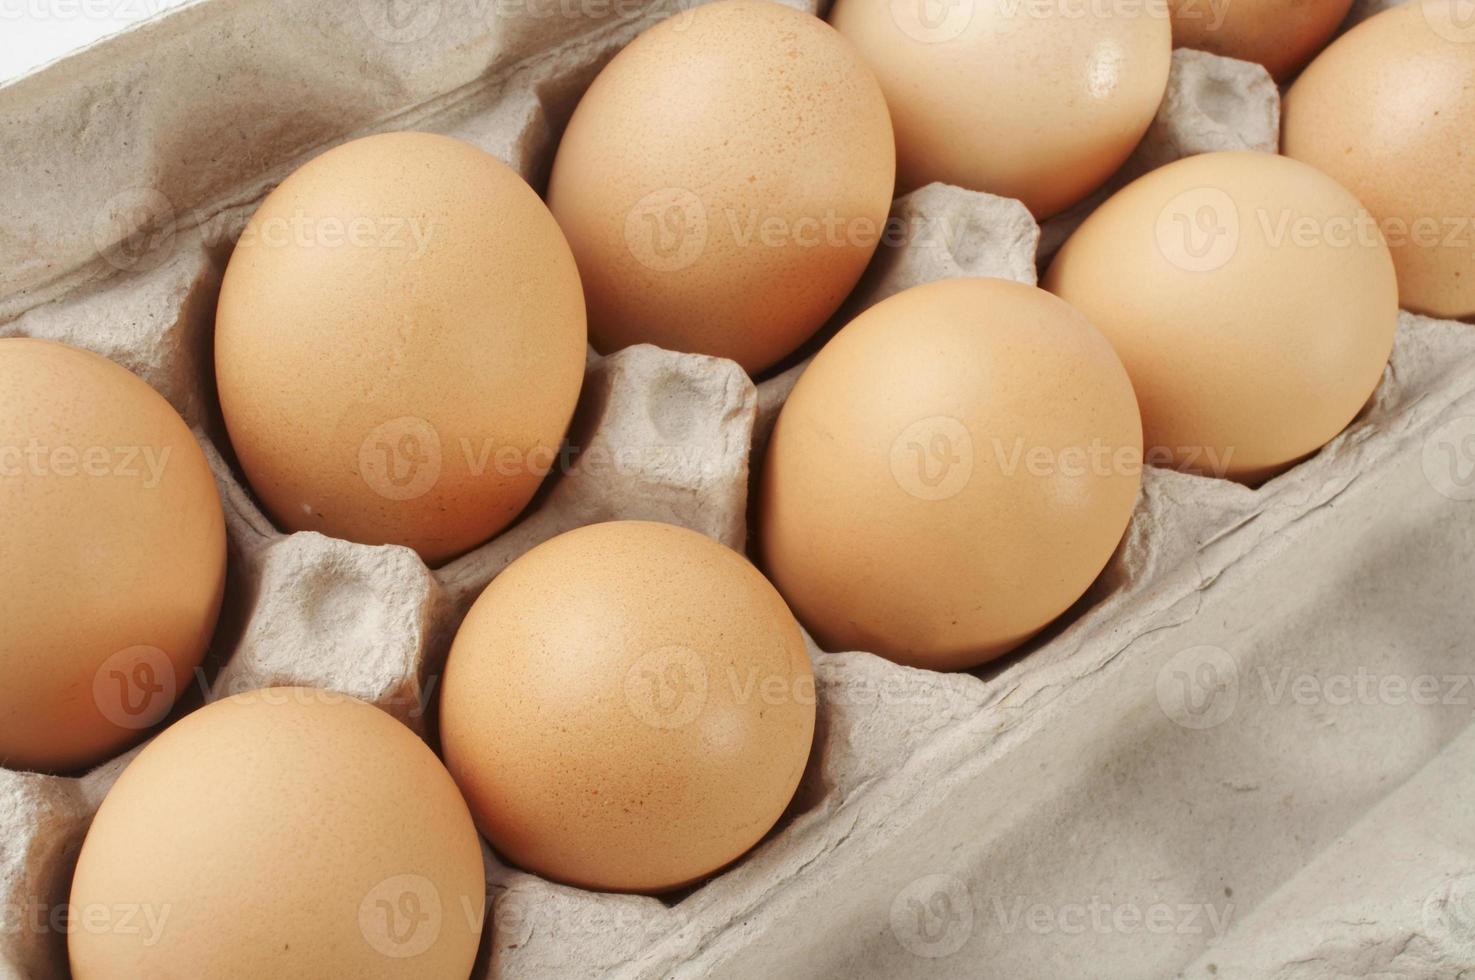 A close-up shot of a carton of eggs on a white background photo